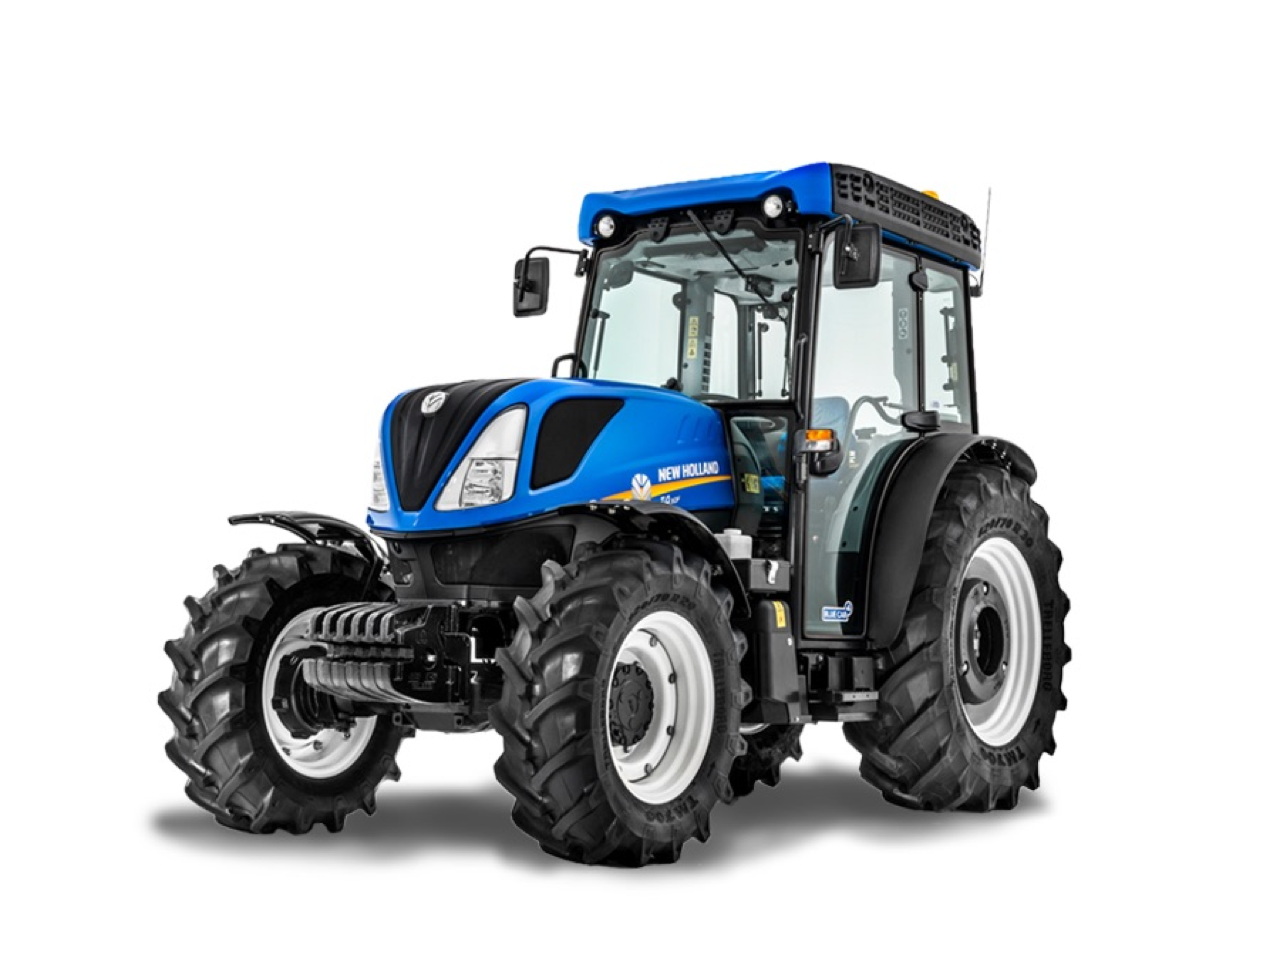 New Holland T4.80N